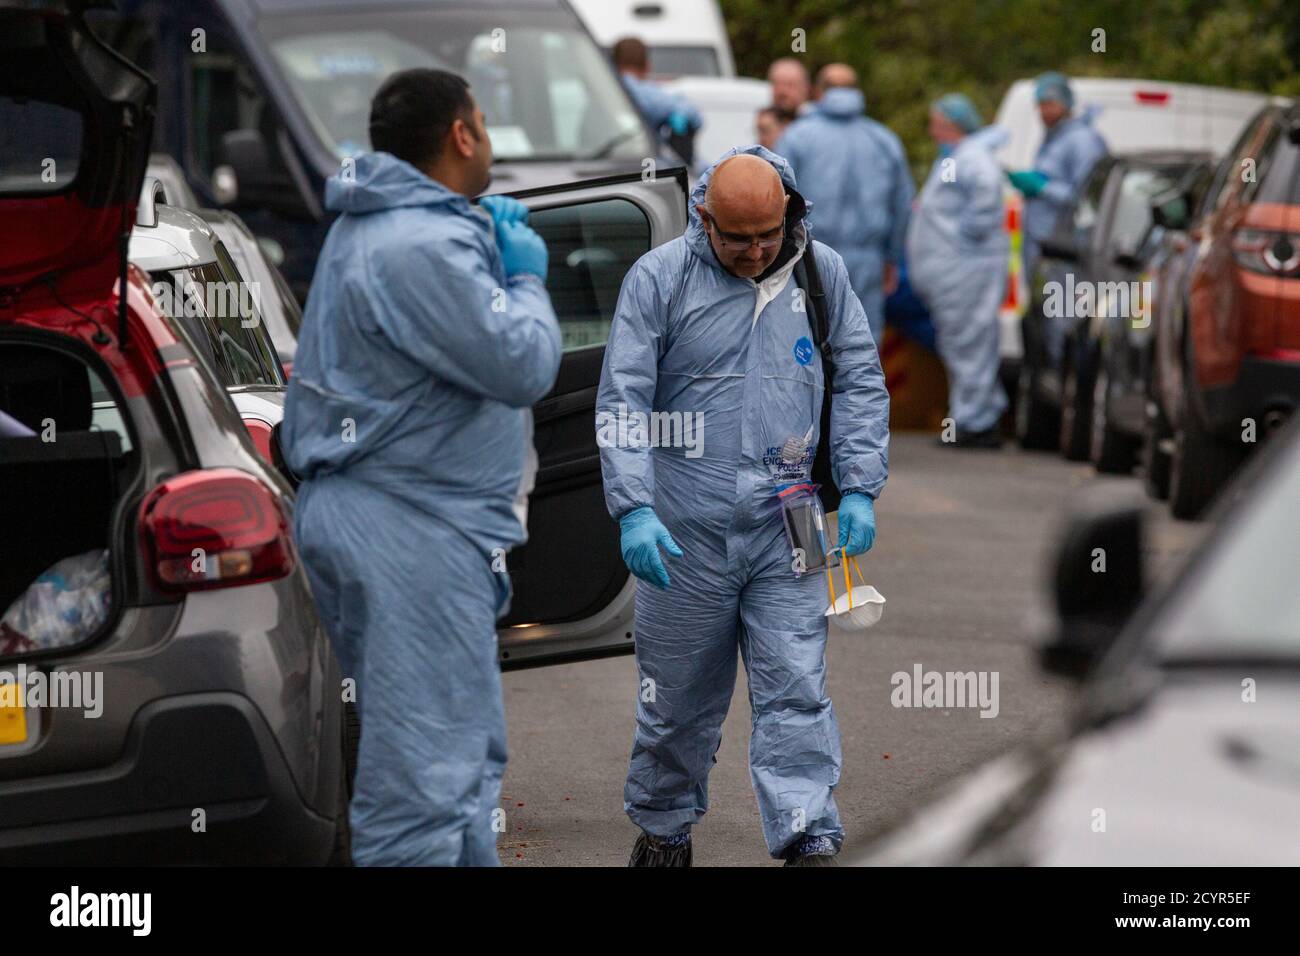 Metropolitan Police officers and Forensic officers outside the address of 23-year-old Louis De Zoysa, Norbury, South London, England, UK Stock Photo